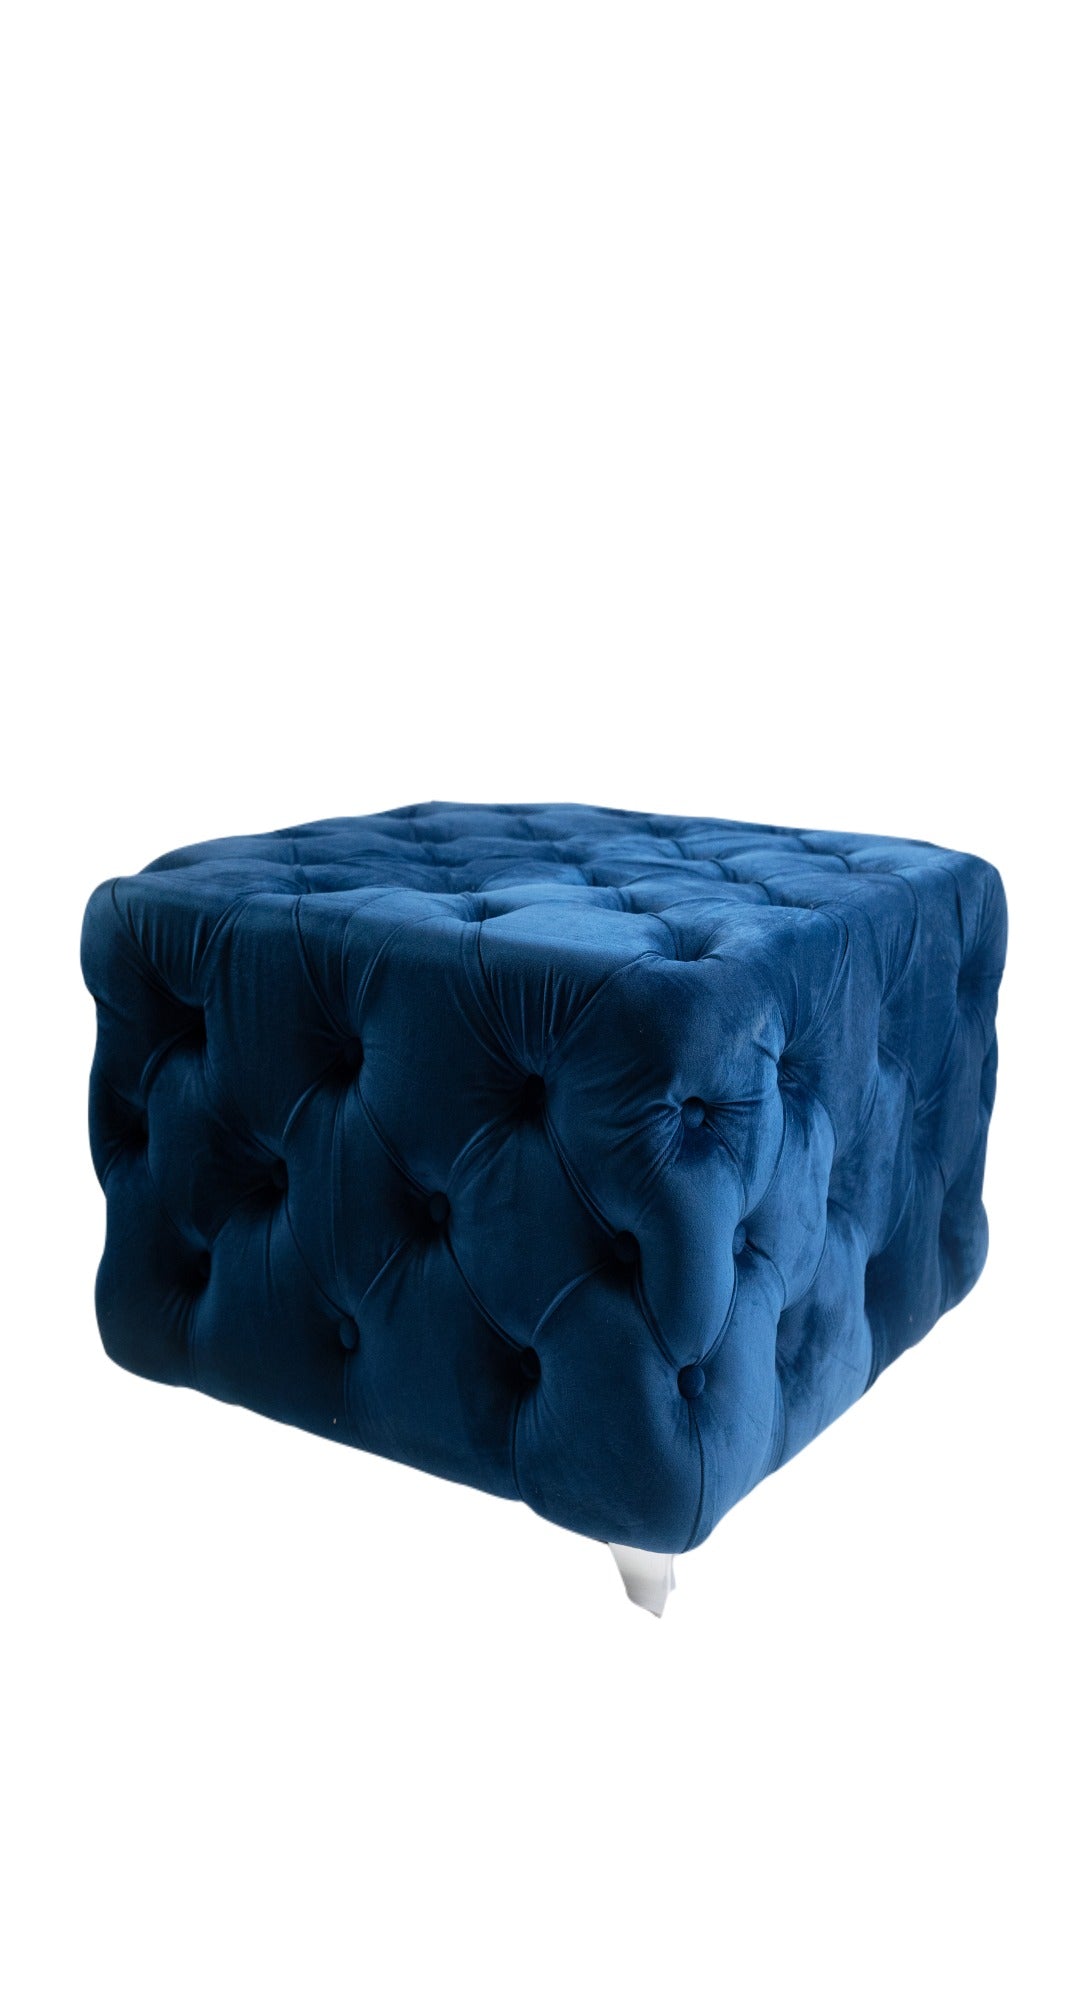 Navy Blue Velvet All-Over Button-Tufted Cocktail Ottoman With  Metal Legs HI-LINE GIFT LTD.